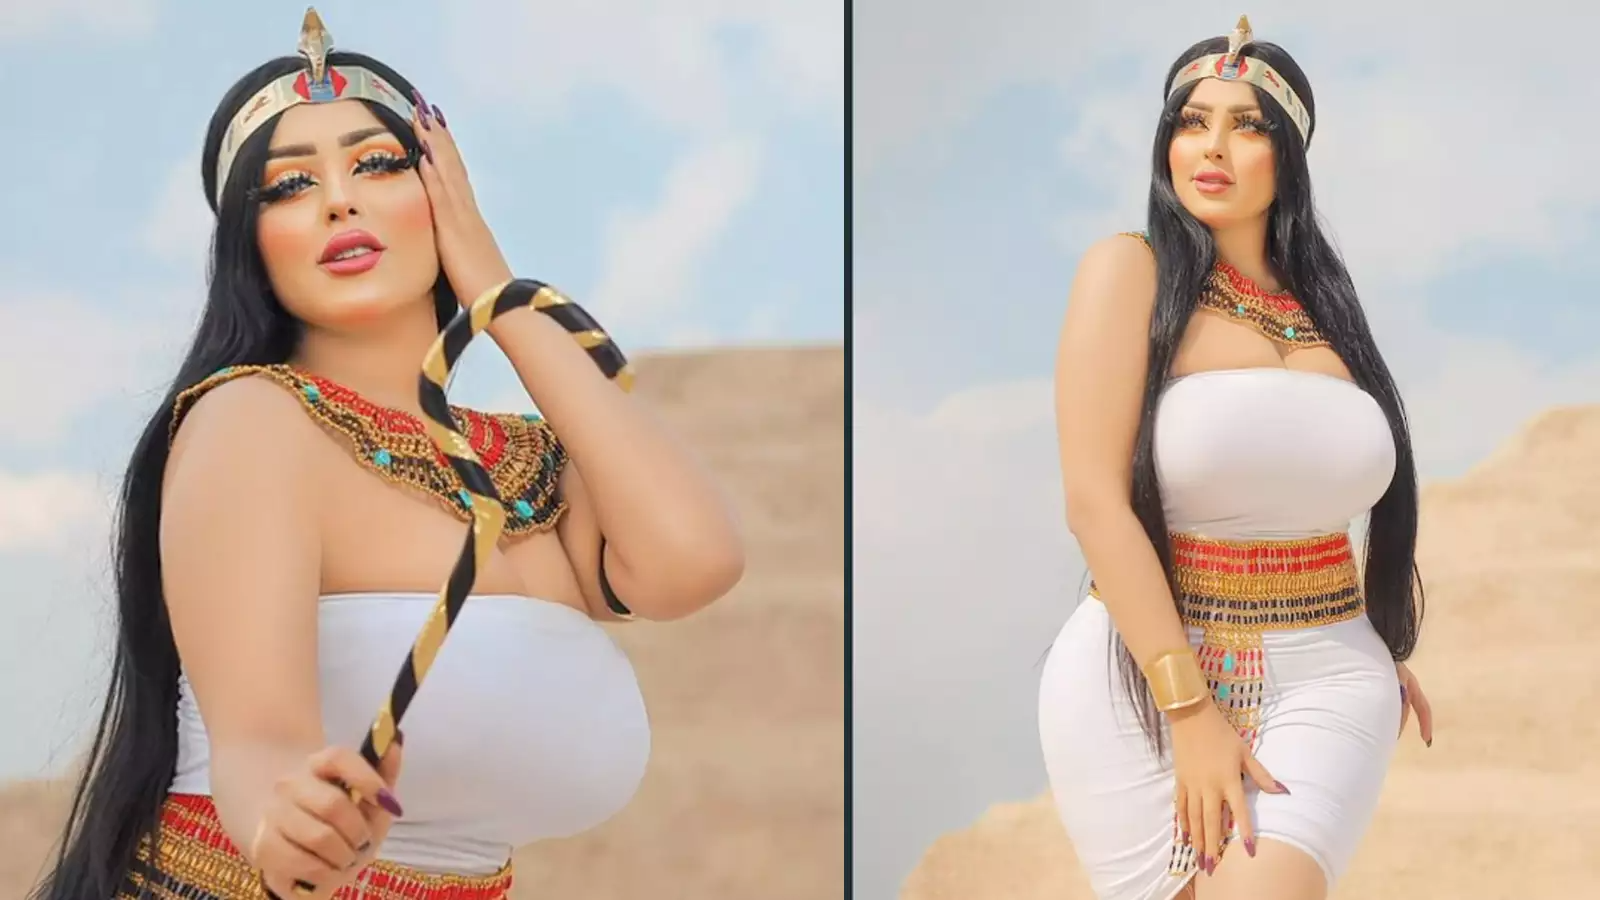 Leaking a hot video of Salma El-Shimi inside the Egyptian pyramids (video)